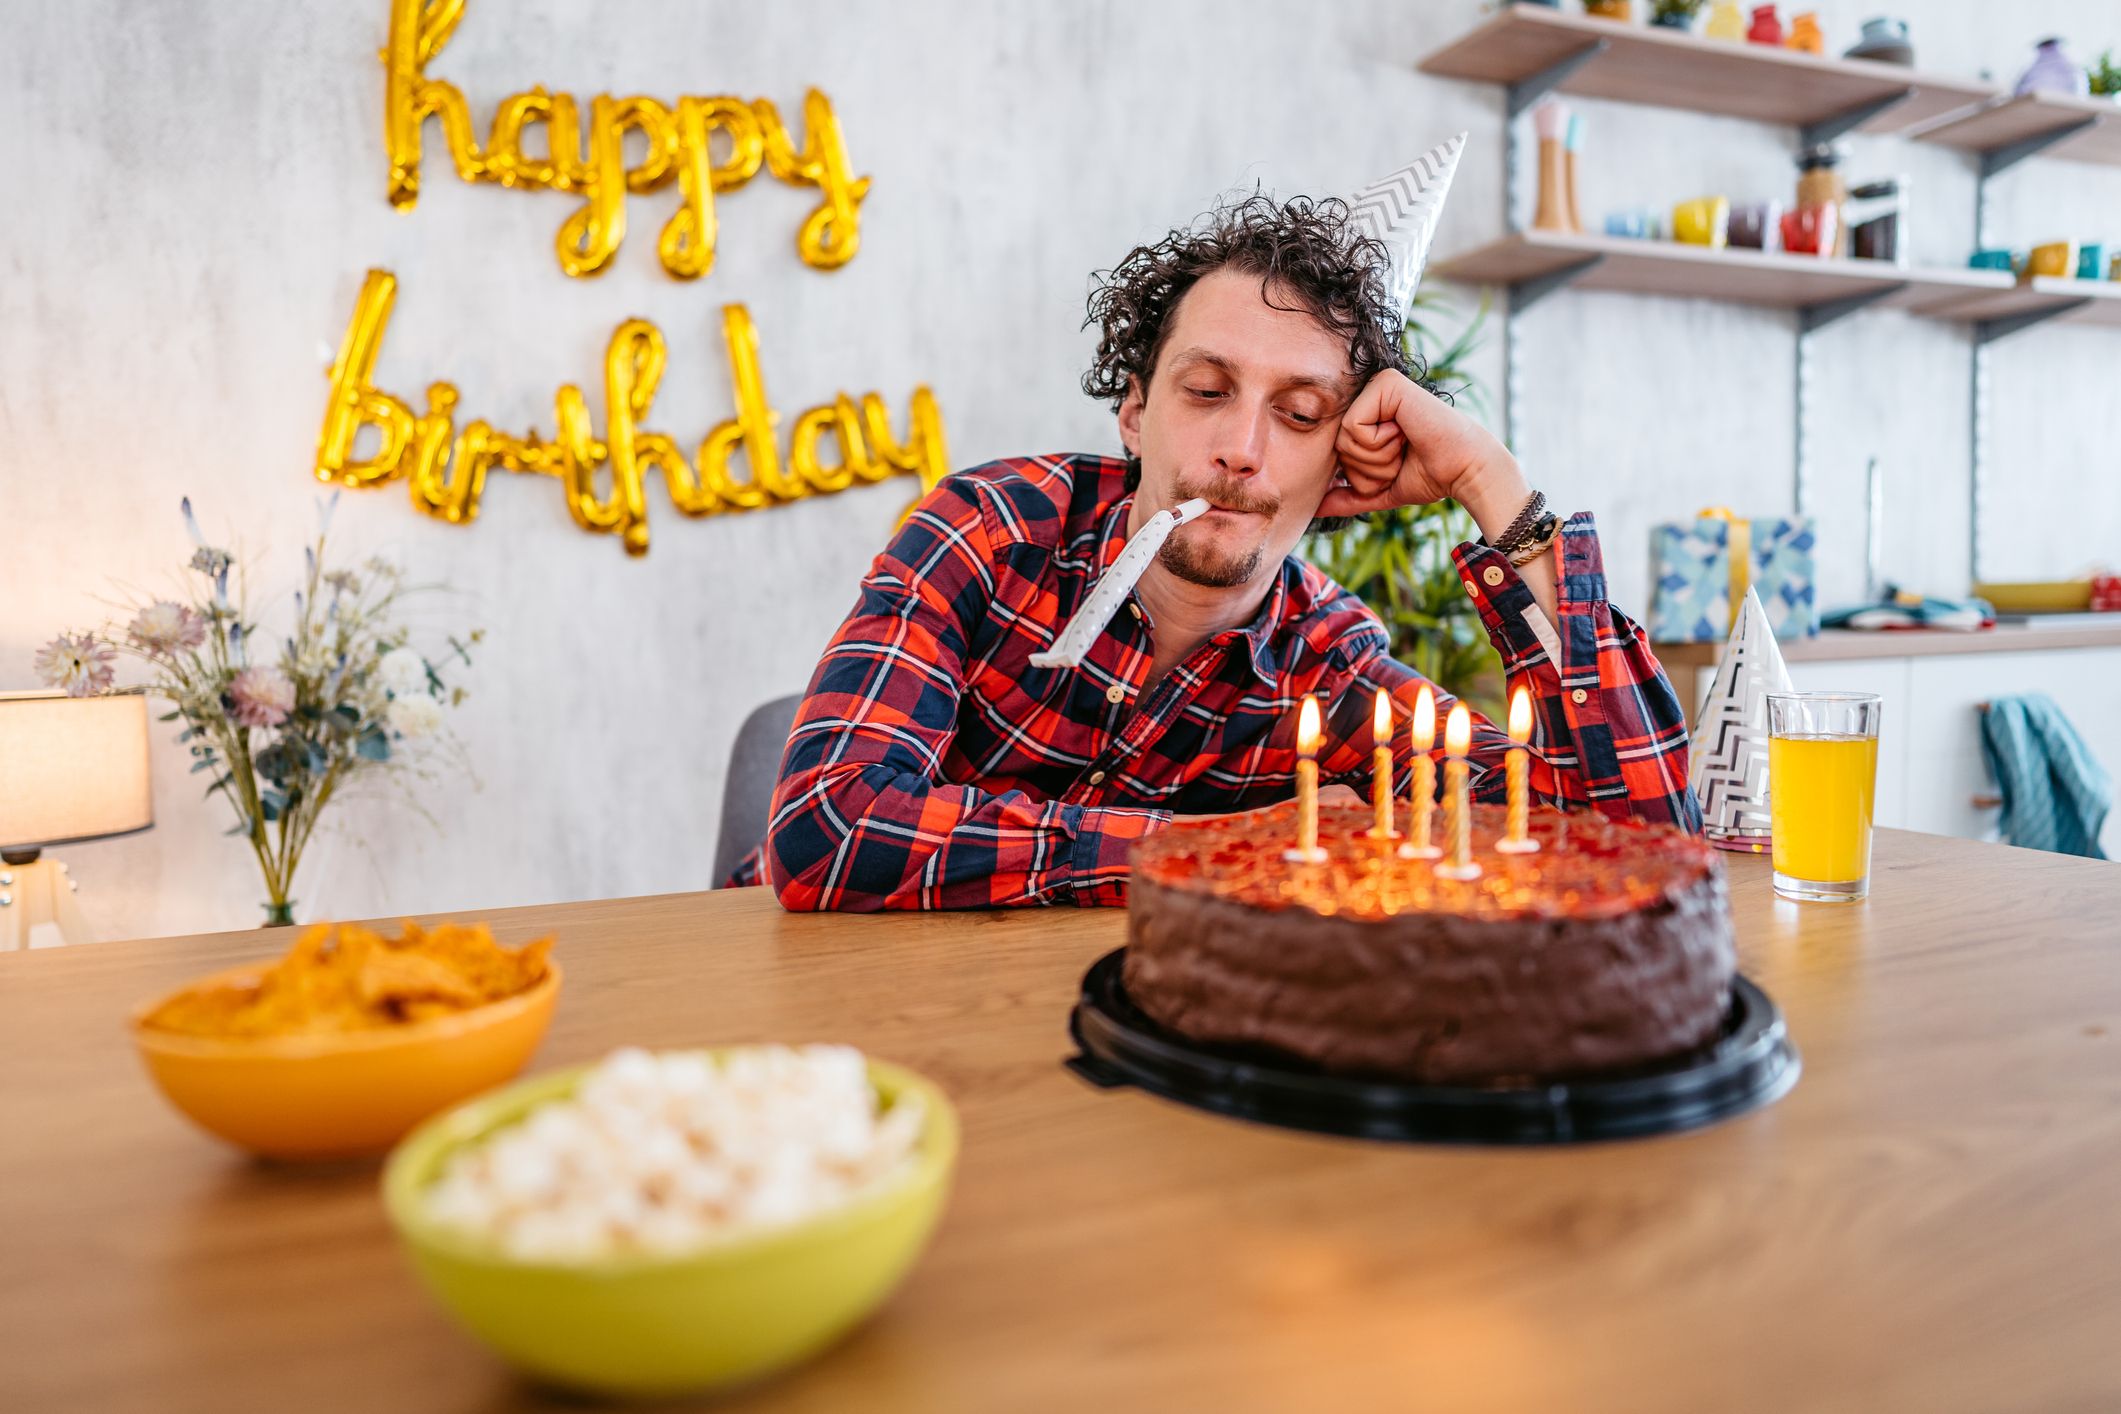 25 Places to get Free stuff on your birthday | Birthday freebies, Free  birthday stuff, Freebies on your birthday